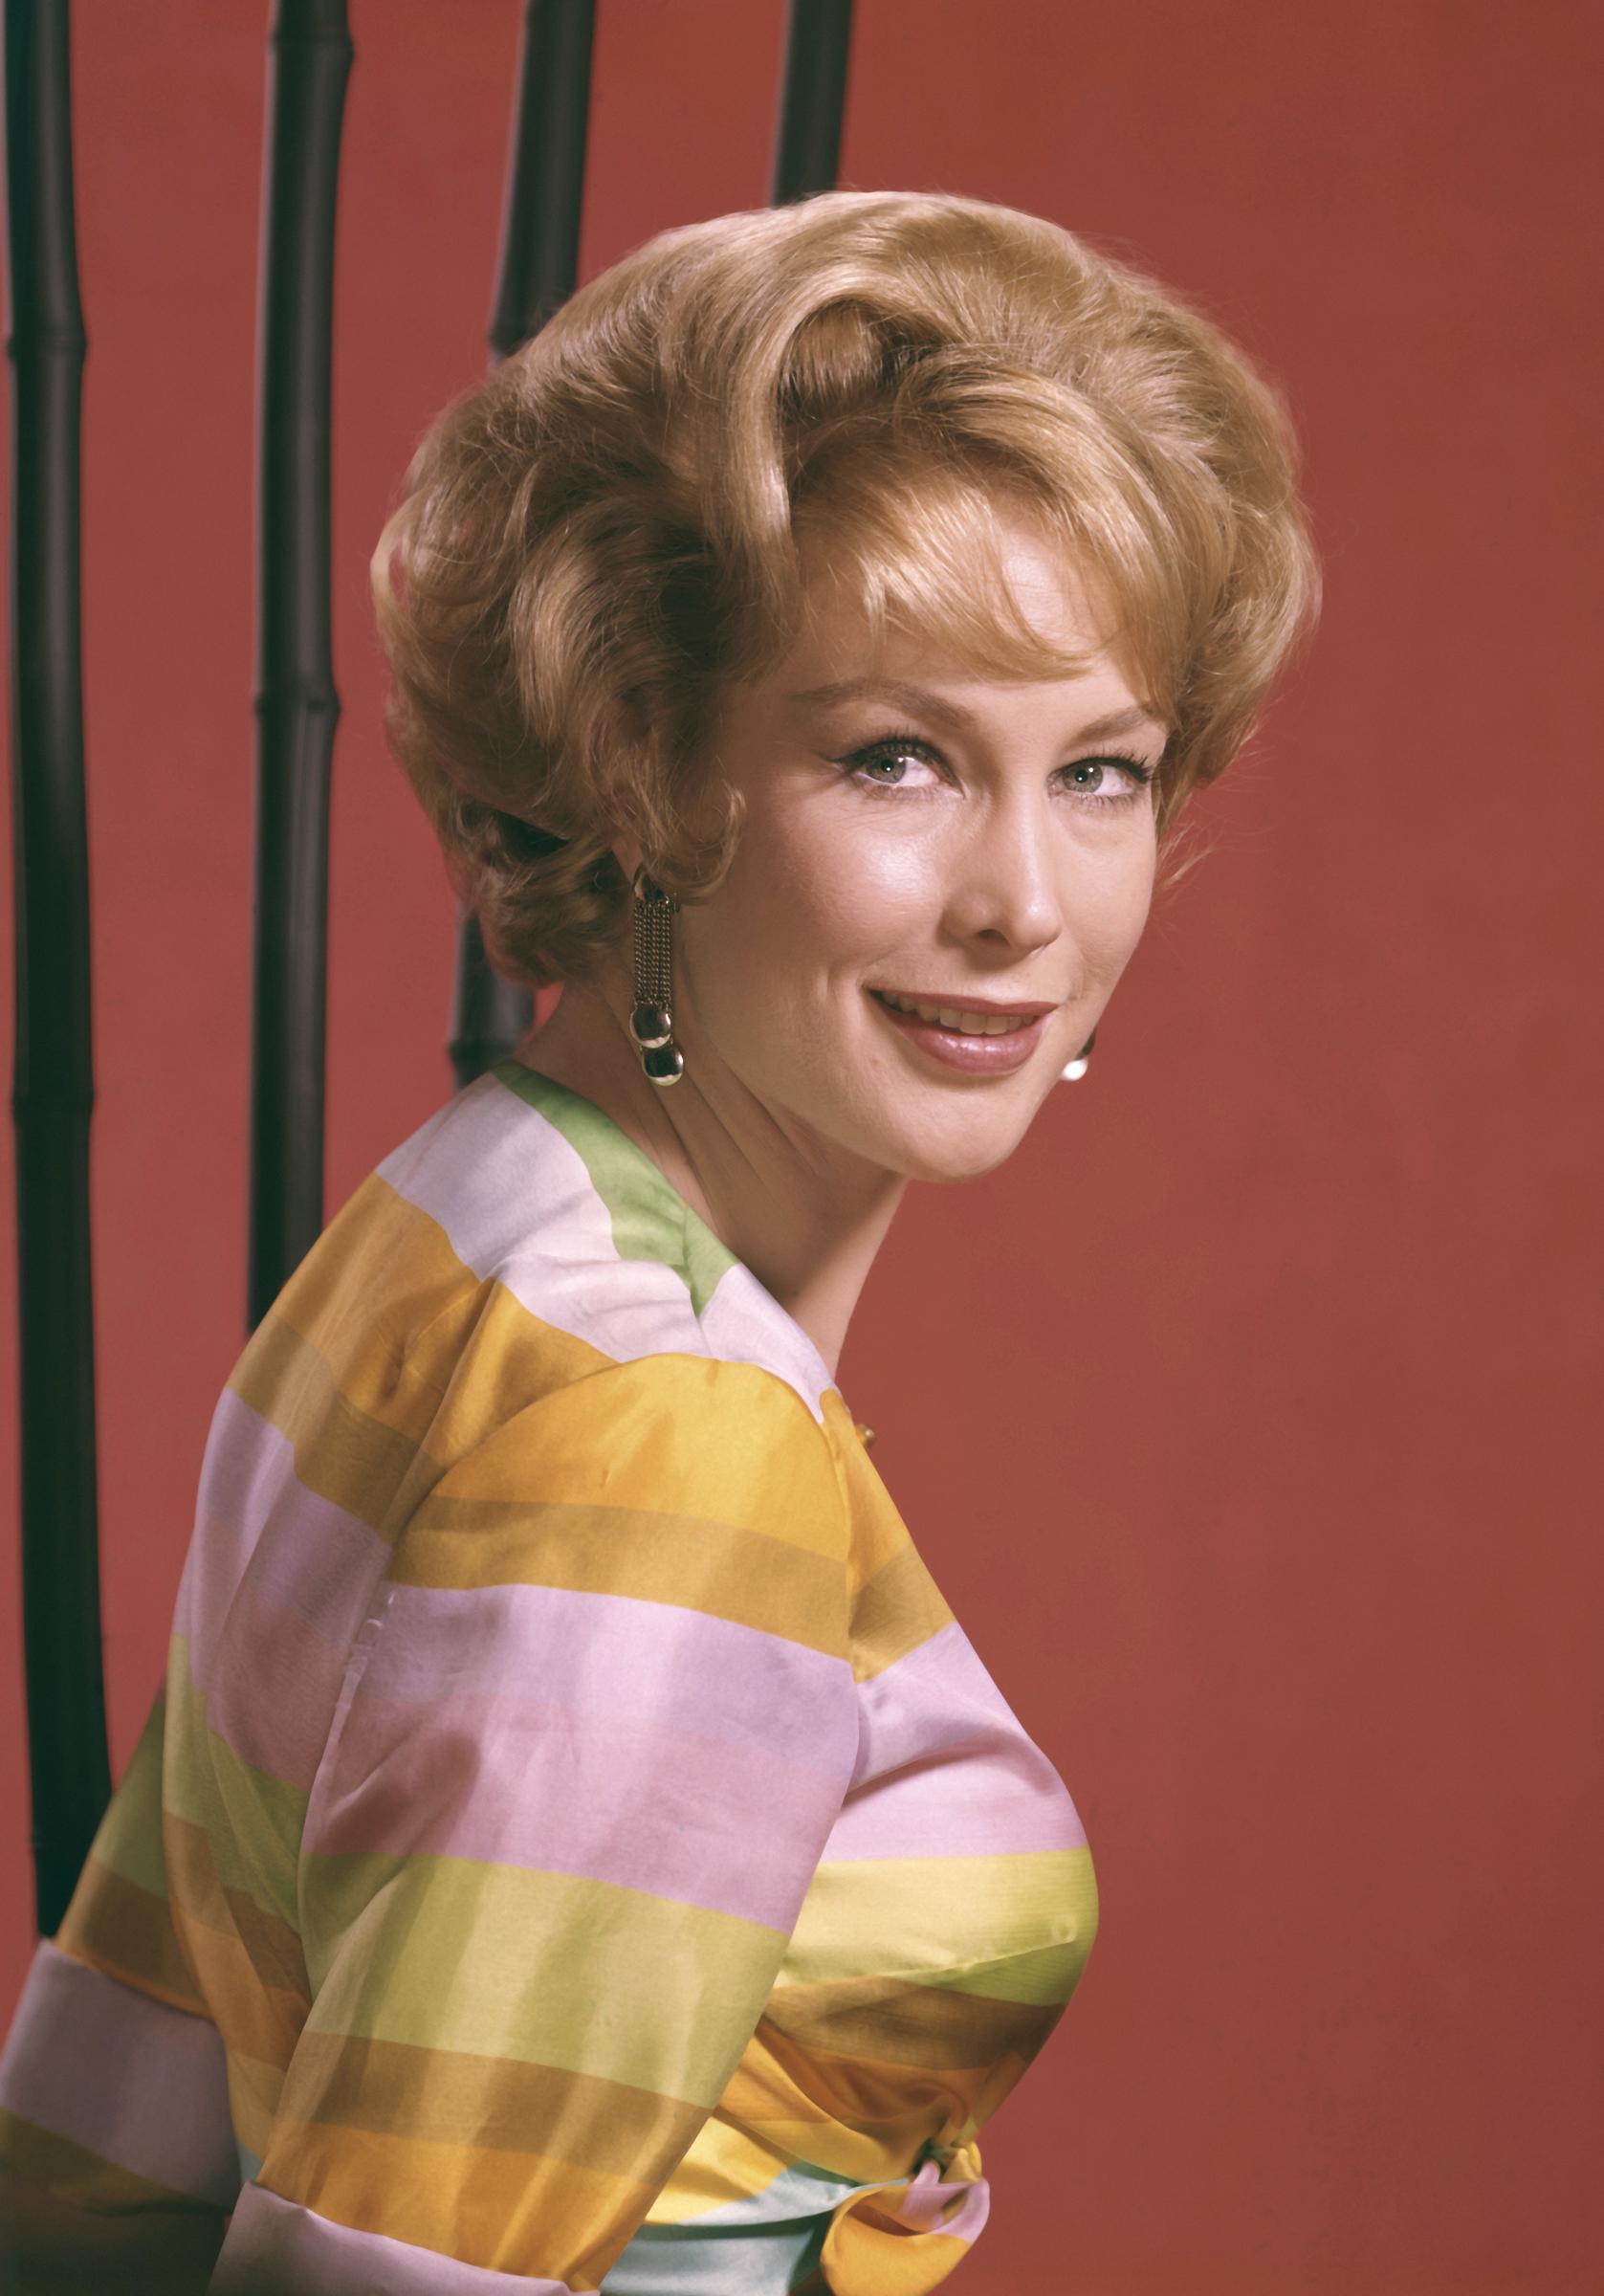 A portrait of Barbara Eden in the 1962 film "The Wonderful World of Brothers Grimm." | Source: Getty Images